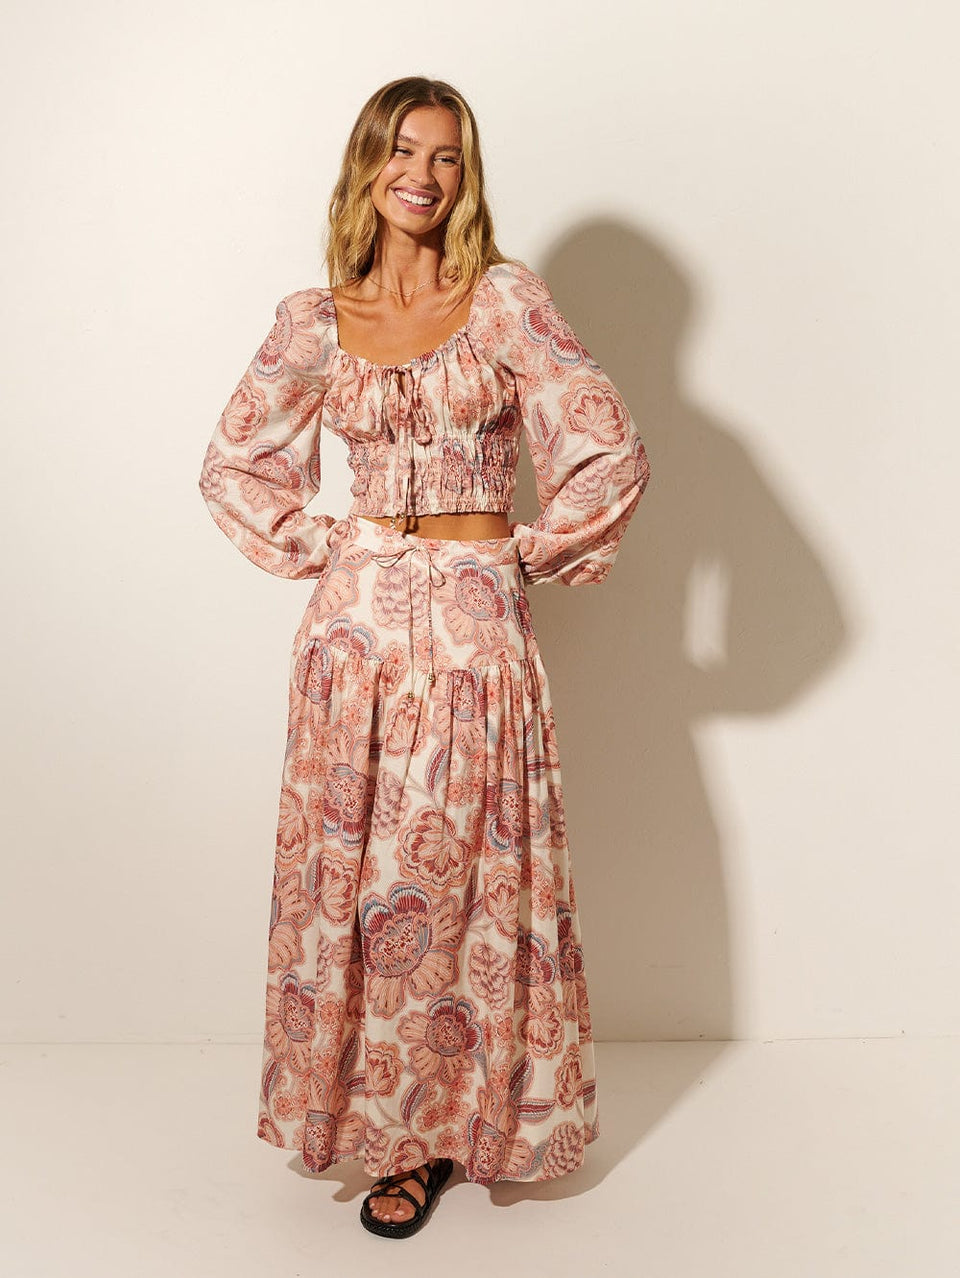 Studio model wears KIVARI Maya Crop Top: A pink and red floral on a natural base featuring an elasticated neckline, full-length blouson sleeves and a shirred bodice.